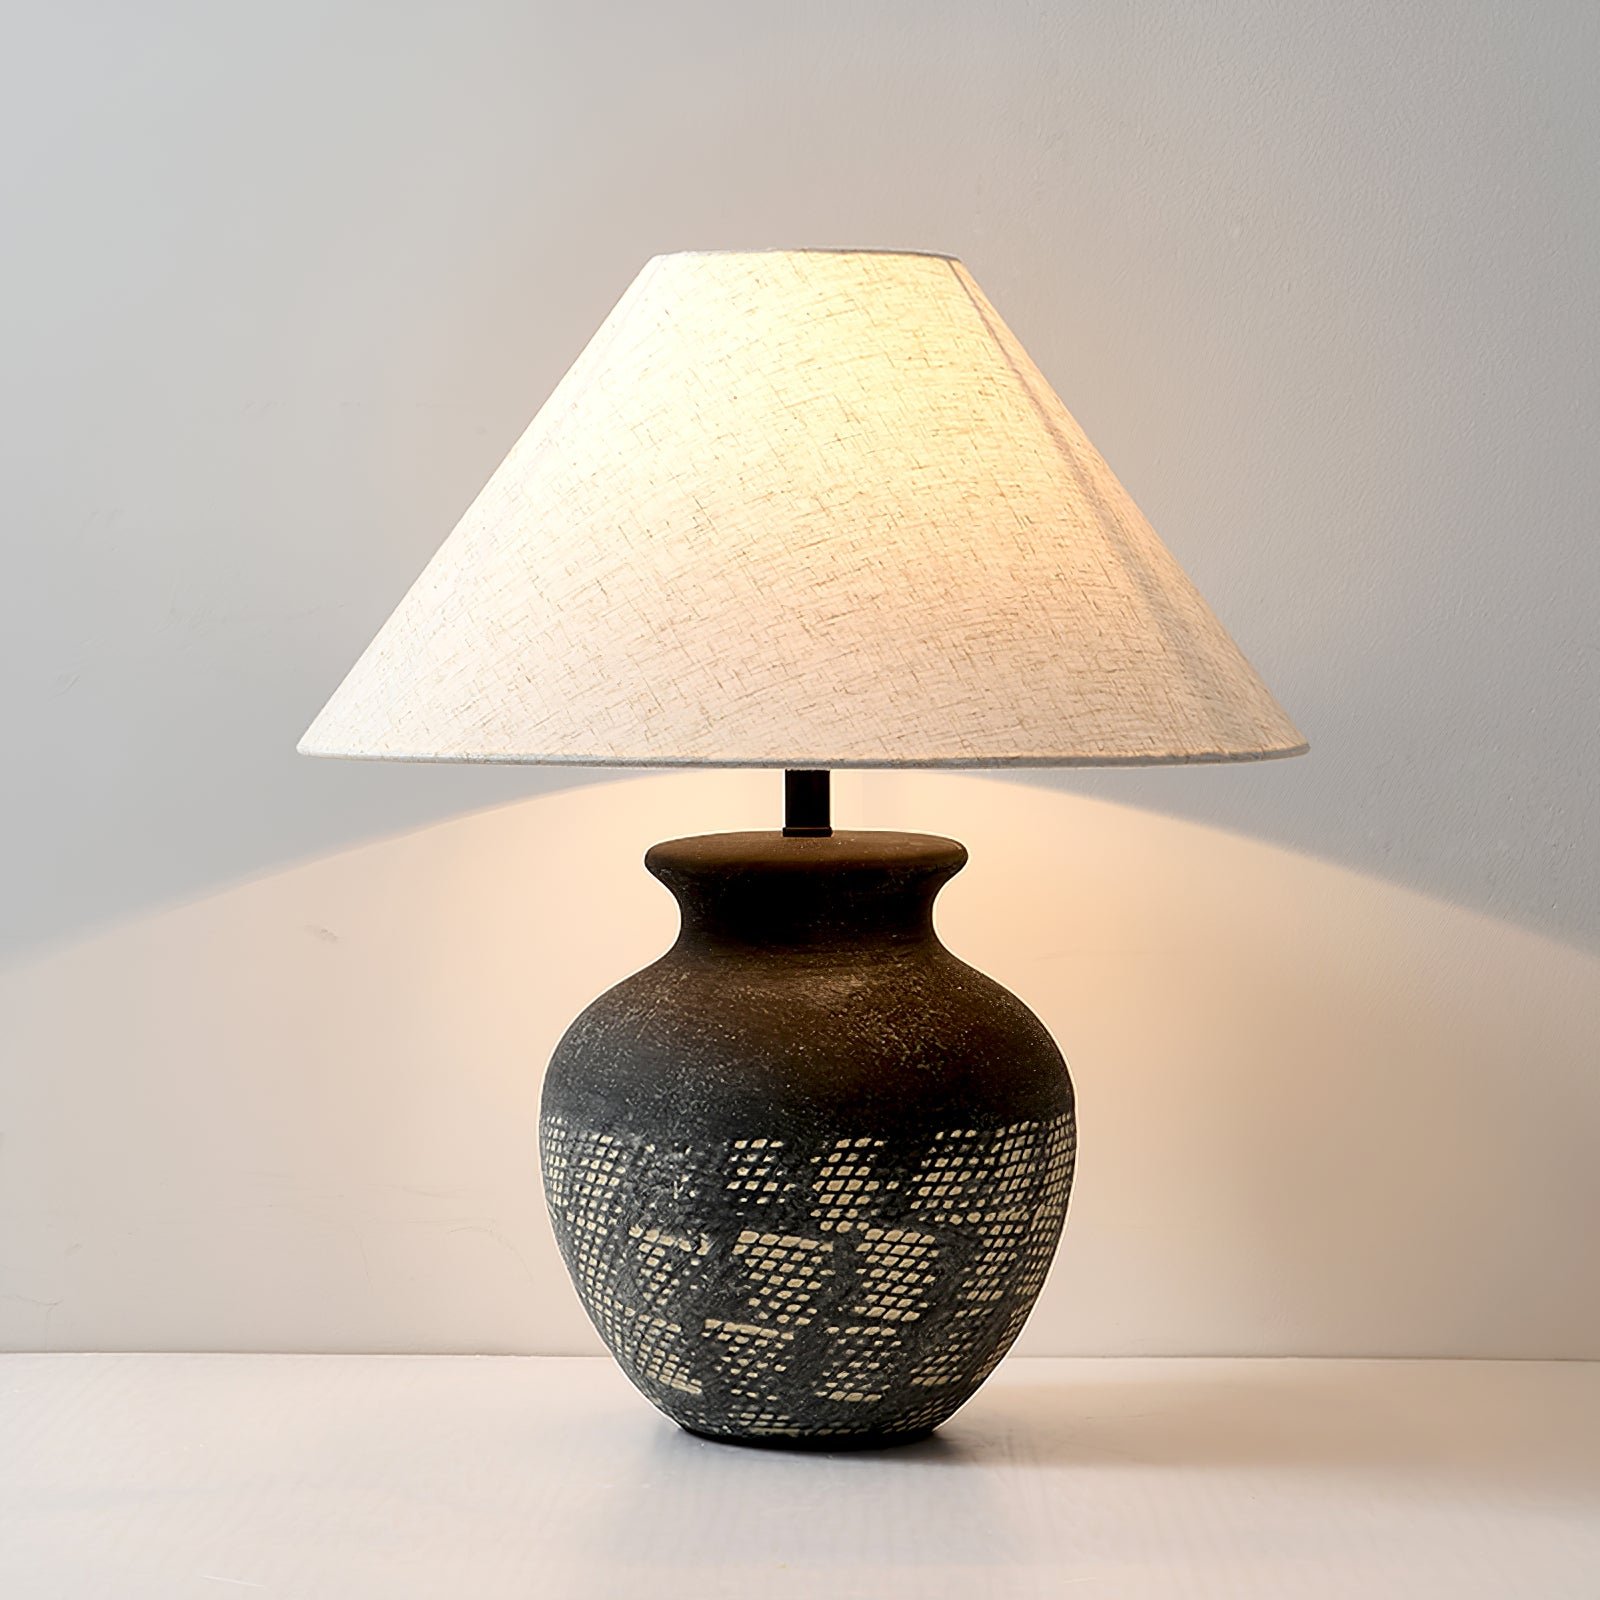 Ansel Ceramic Table Lamp measuring 17.7" in diameter and 20" in height (45cm x 51cm) with a black and beige color combination and a UK plug.